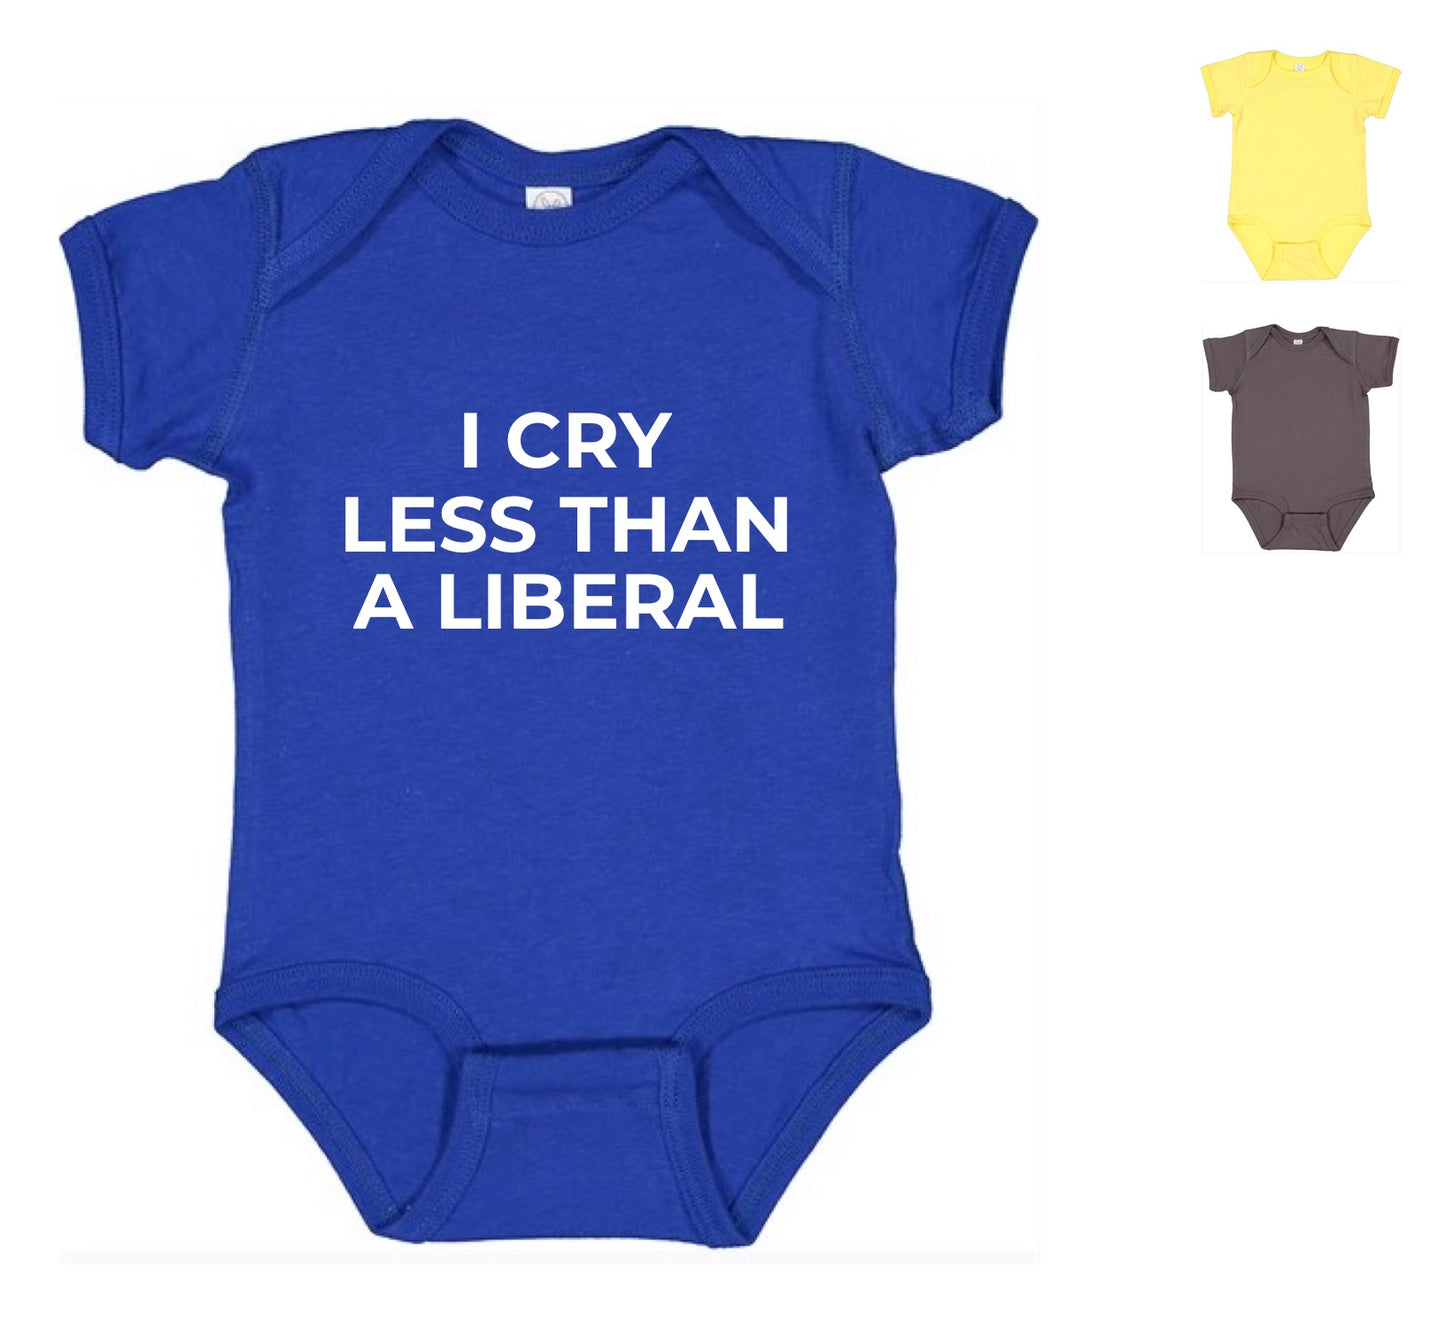 I Cry Less Than A Liberal Onesie (FREE Shipping)